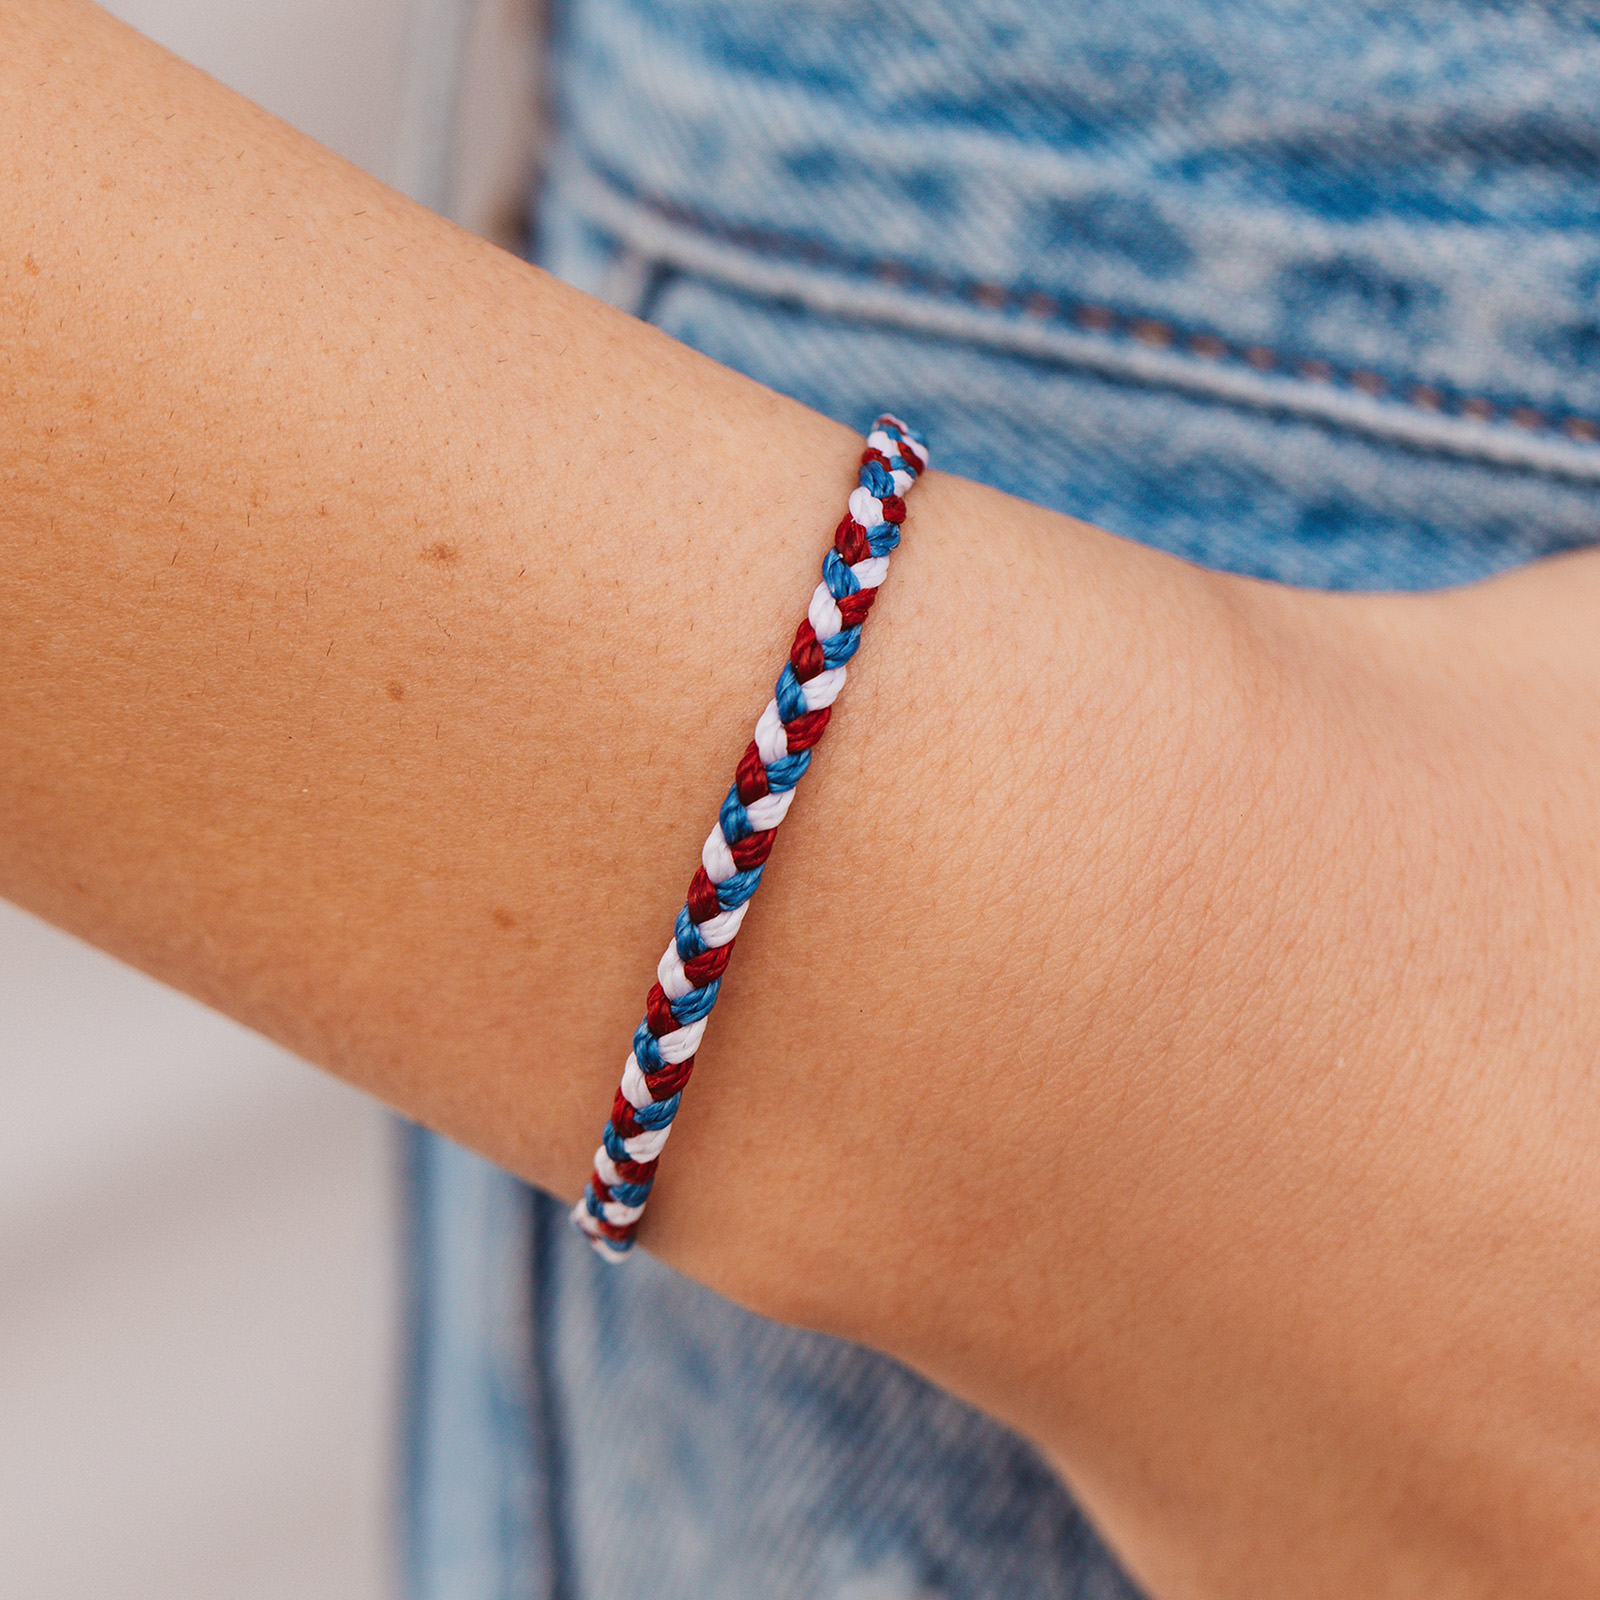 Pura Vida's Home for Our Troops Braided Bracelet for Father's Day